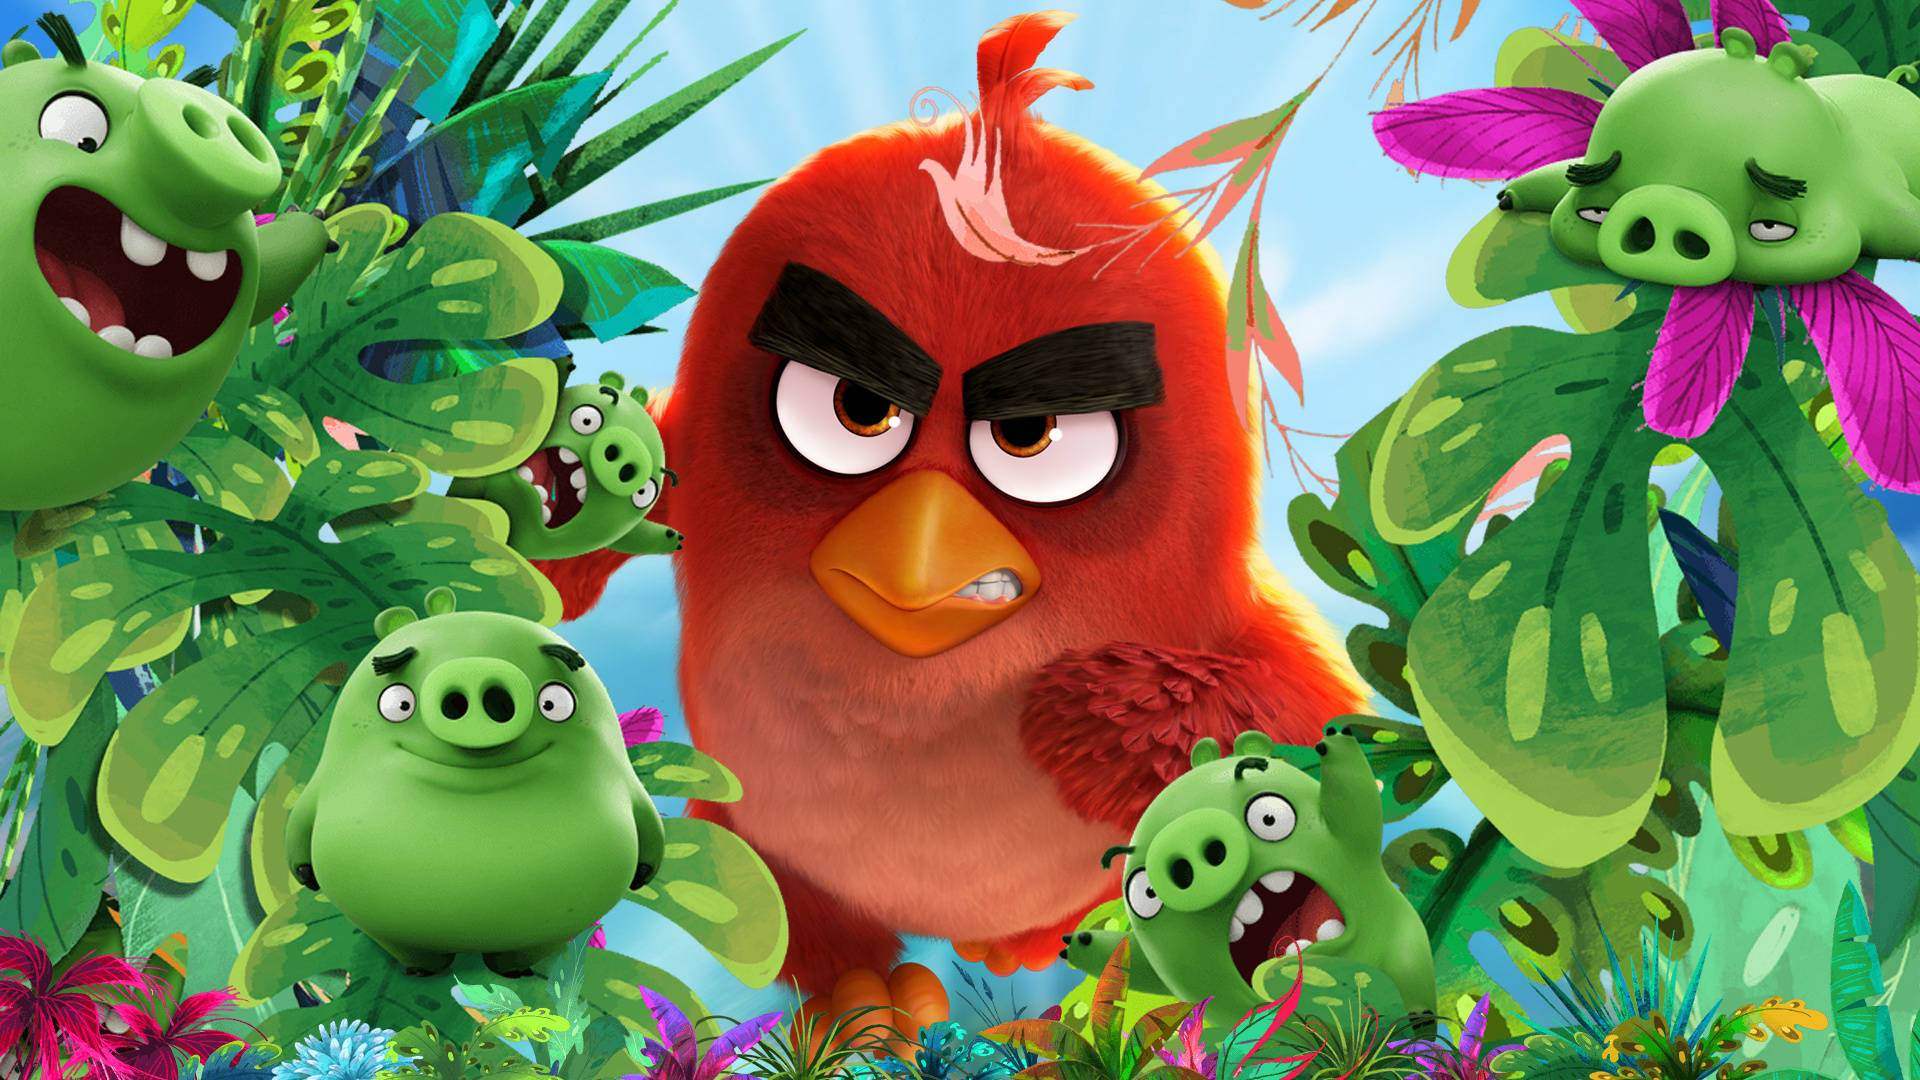 Pigs Vs Bird From The Angry Birds Movie Wallpaper